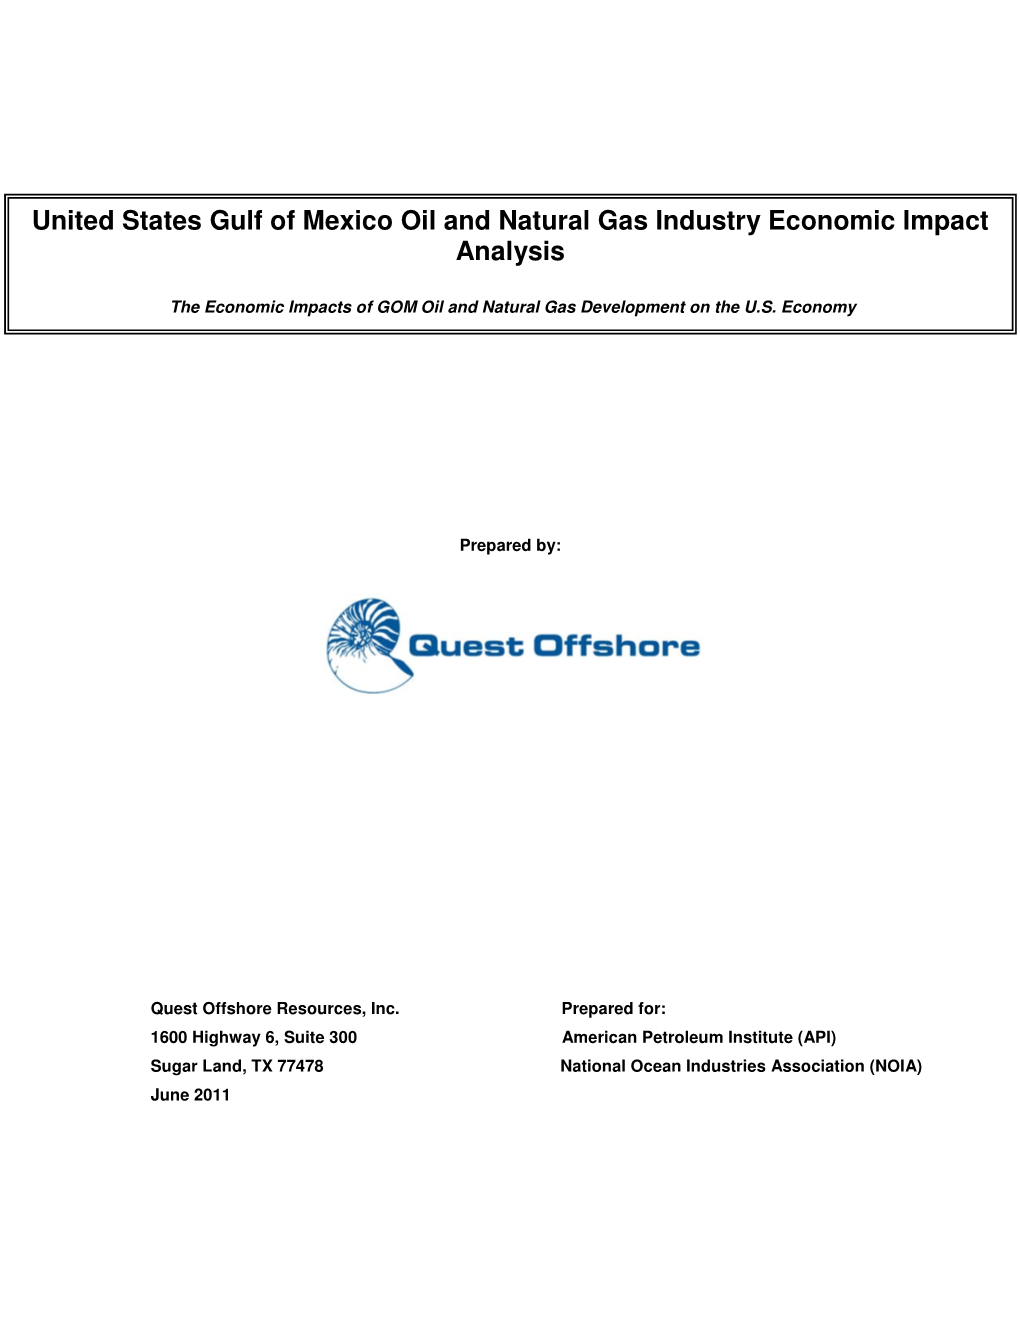 United States Gulf of Mexico Oil and Natural Gas Industry Economic Impact Analysis